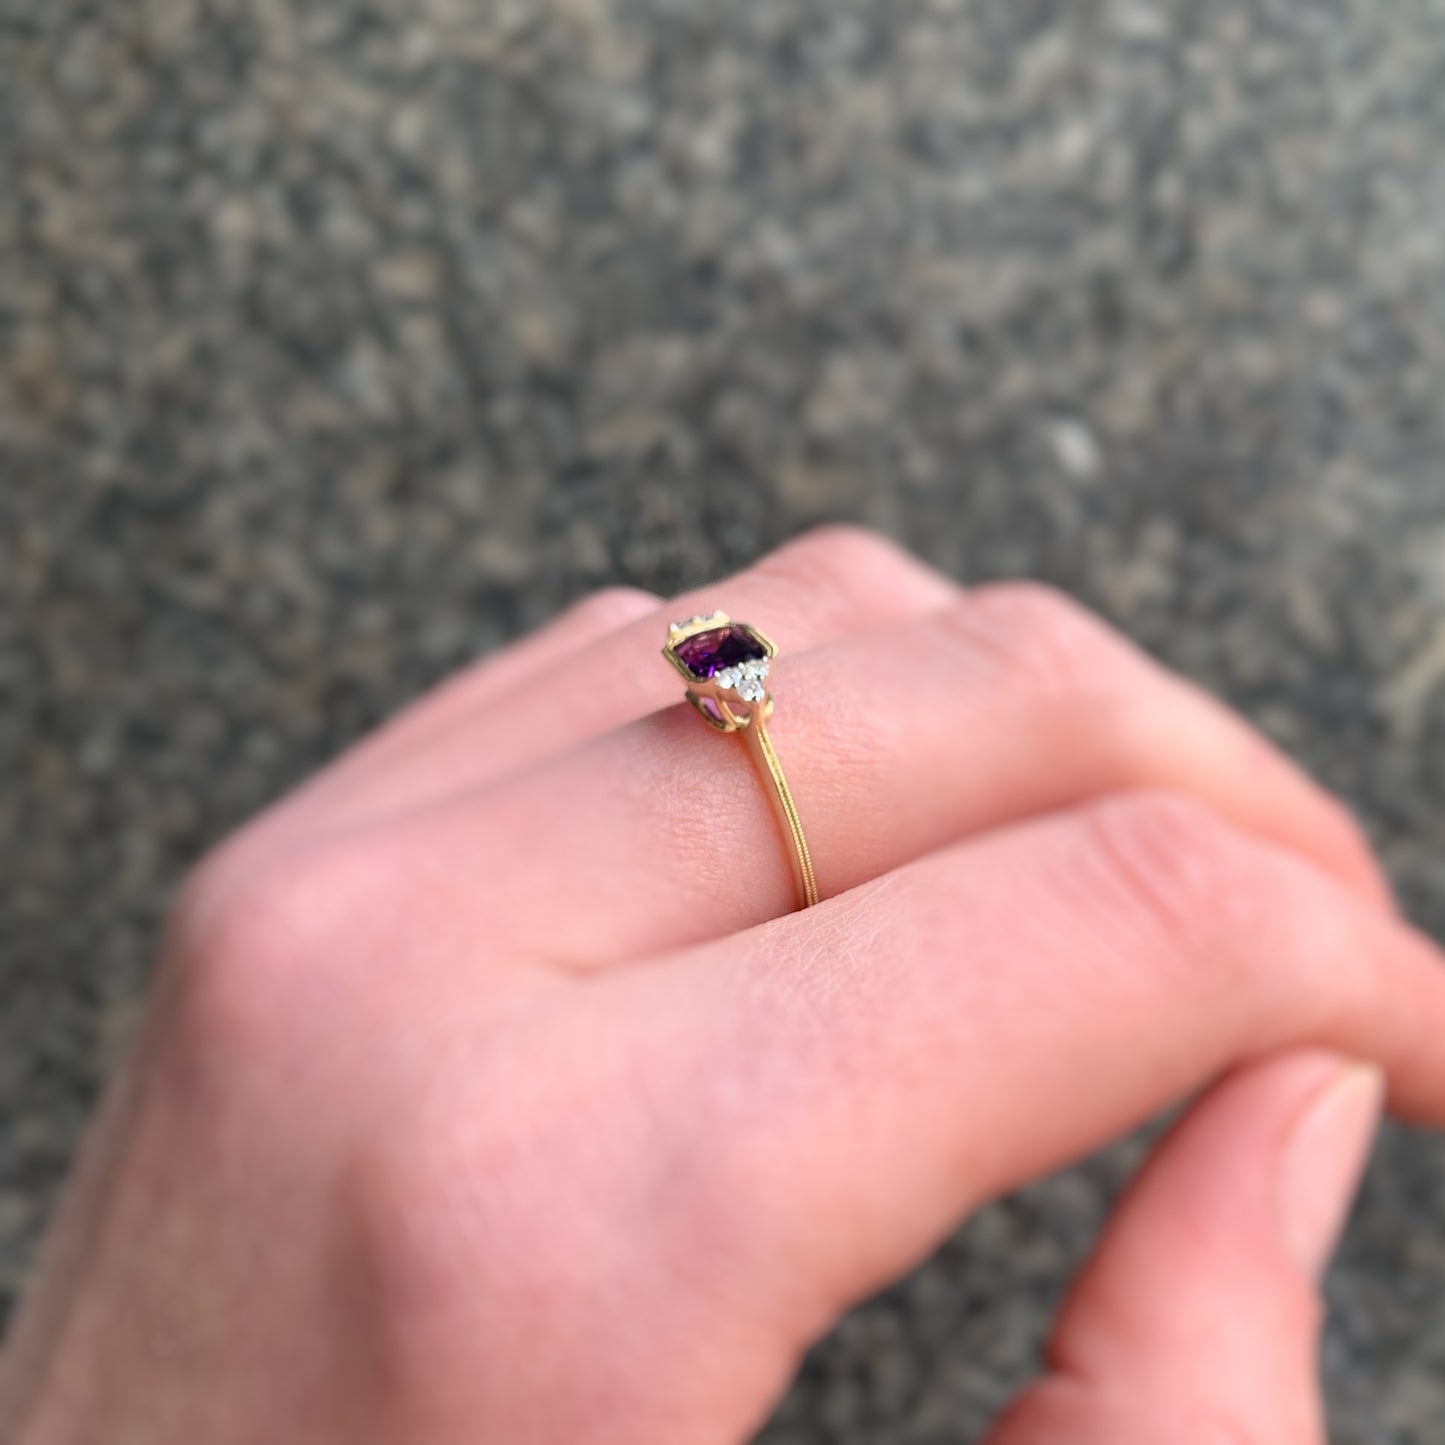 9ct Yellow Gold Amethyst and Diamond Ring - Size M 1/2